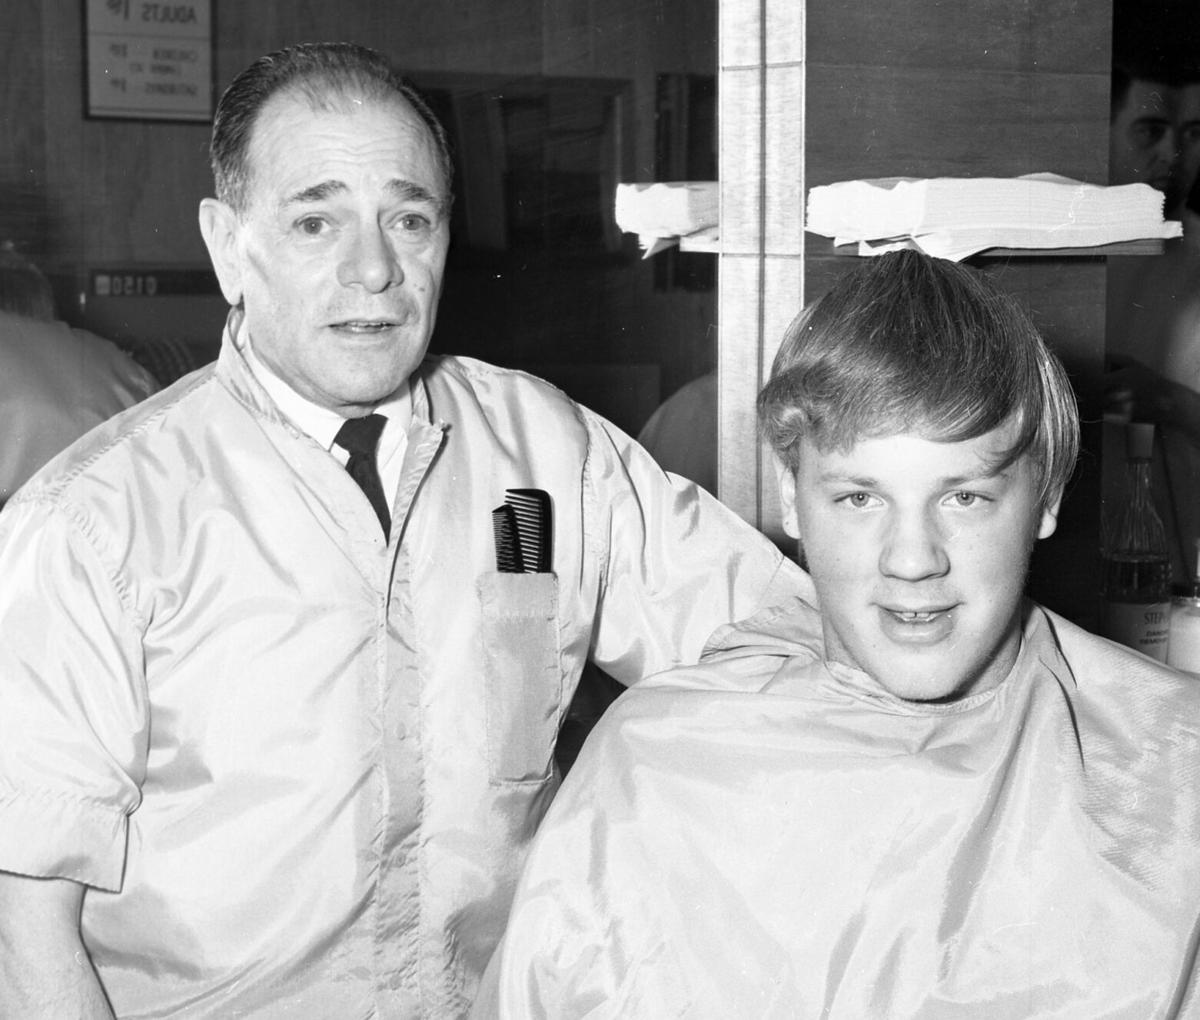 From the 1960s archives: The changing styles of men’s hair